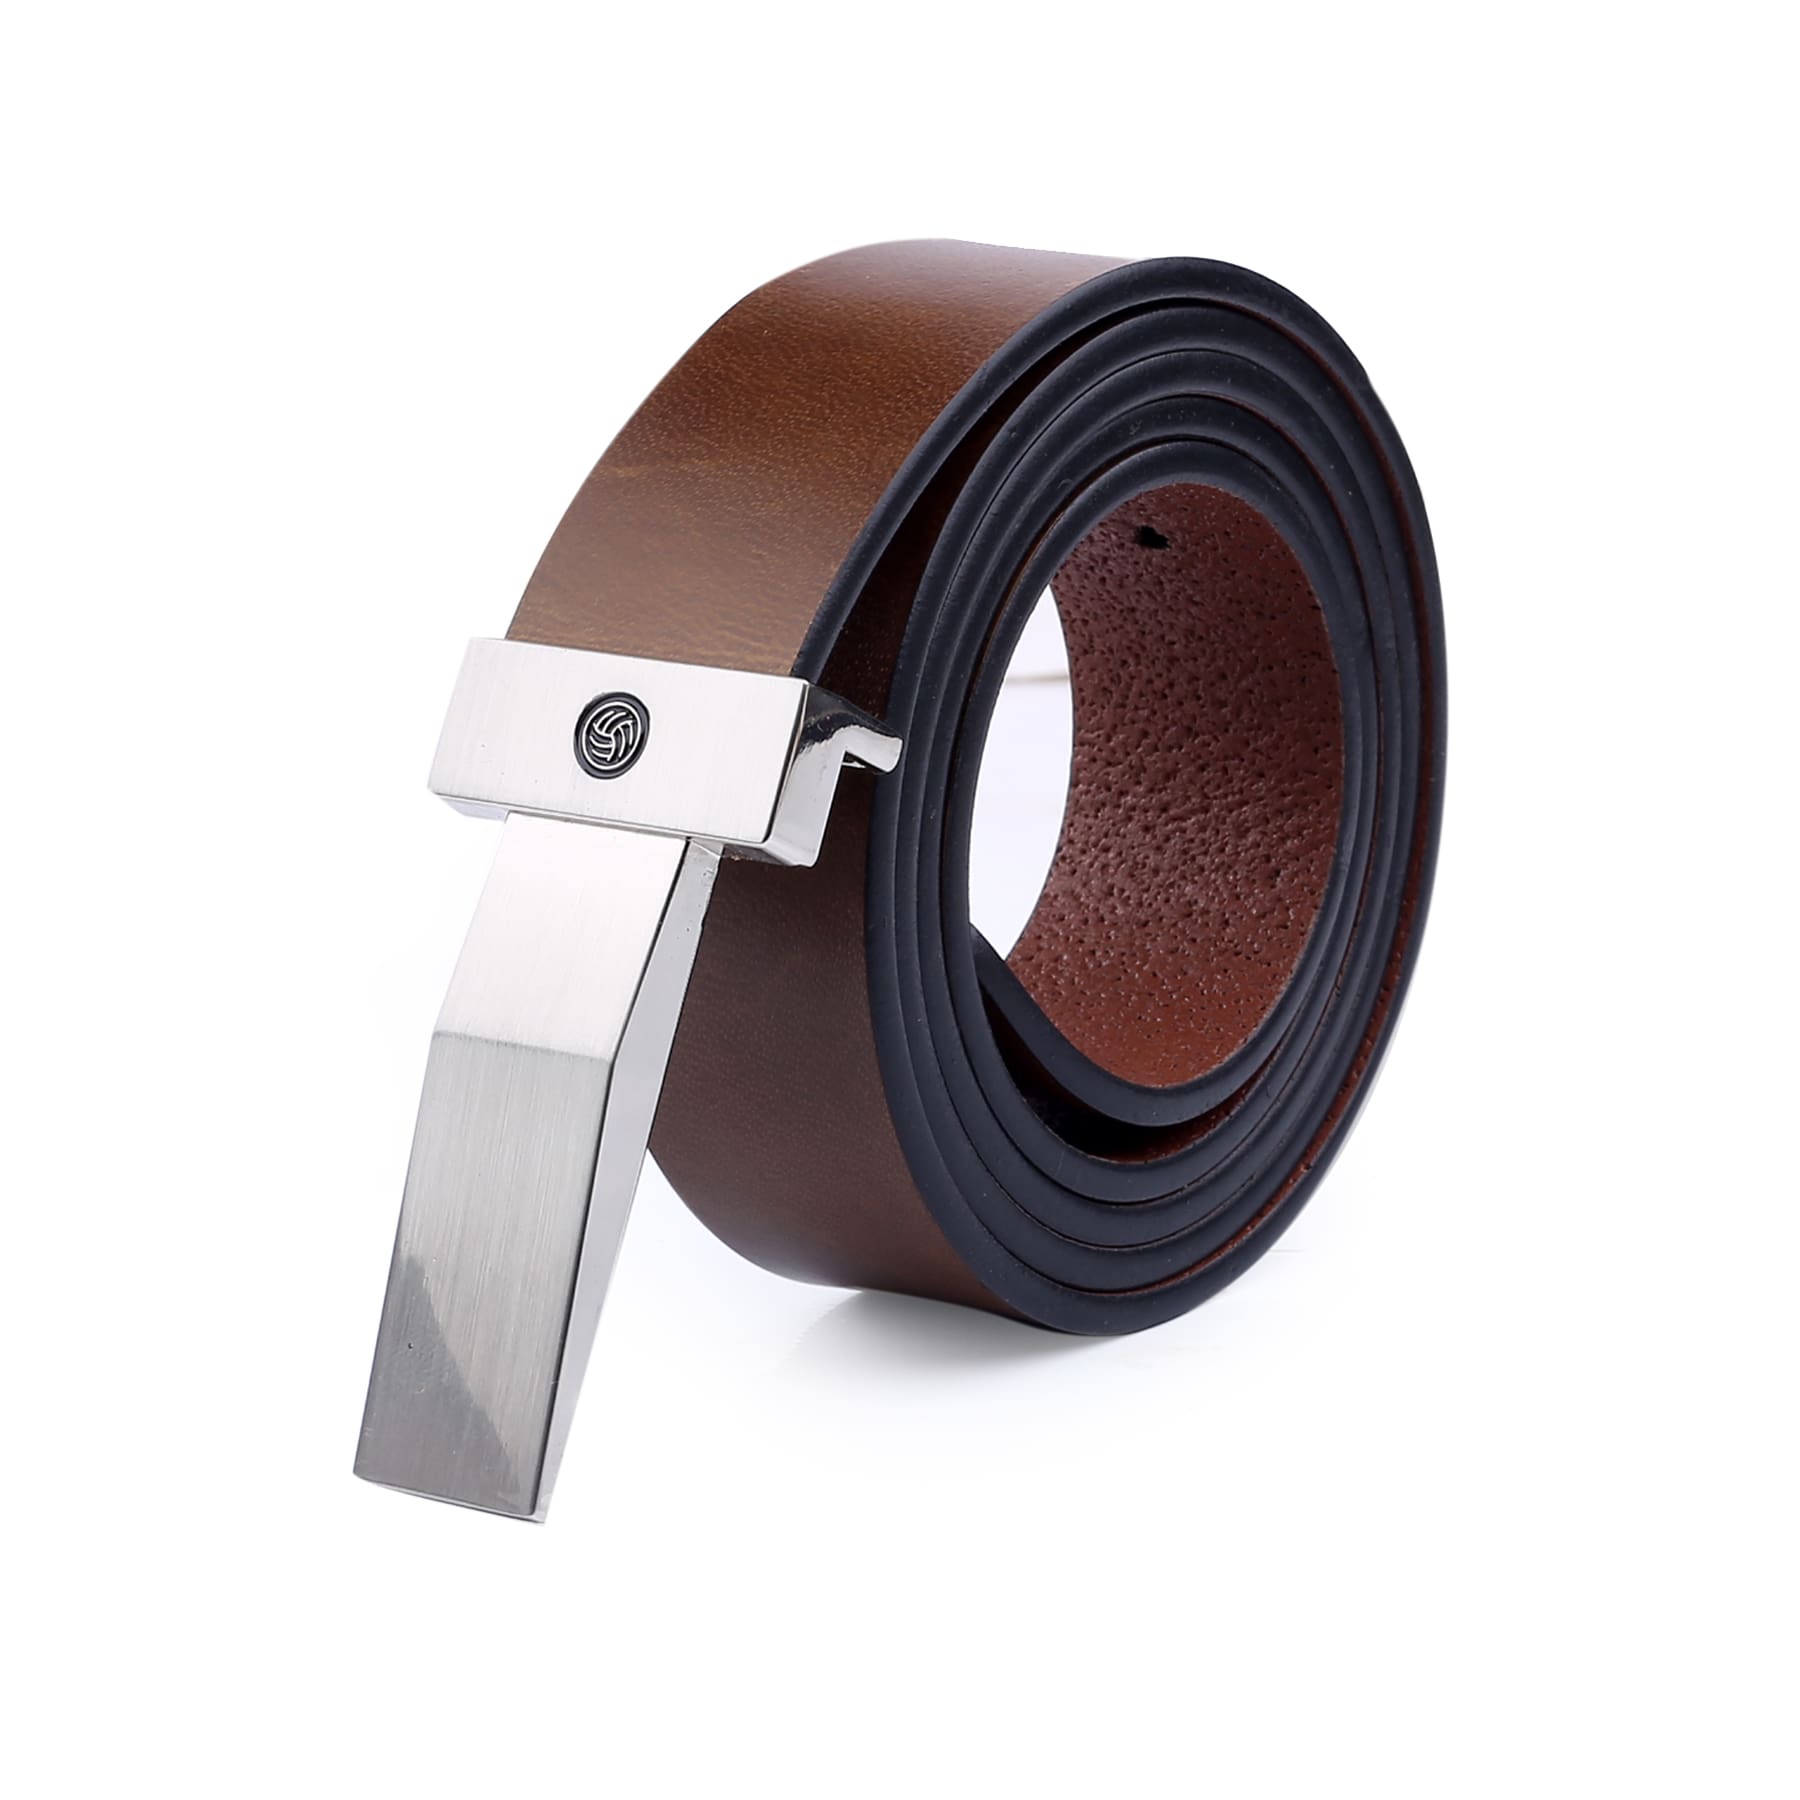 Bacca Bucci Premium Leather Formal Dress Belts with a Stylish Finish & a Nickel-Free Buckle